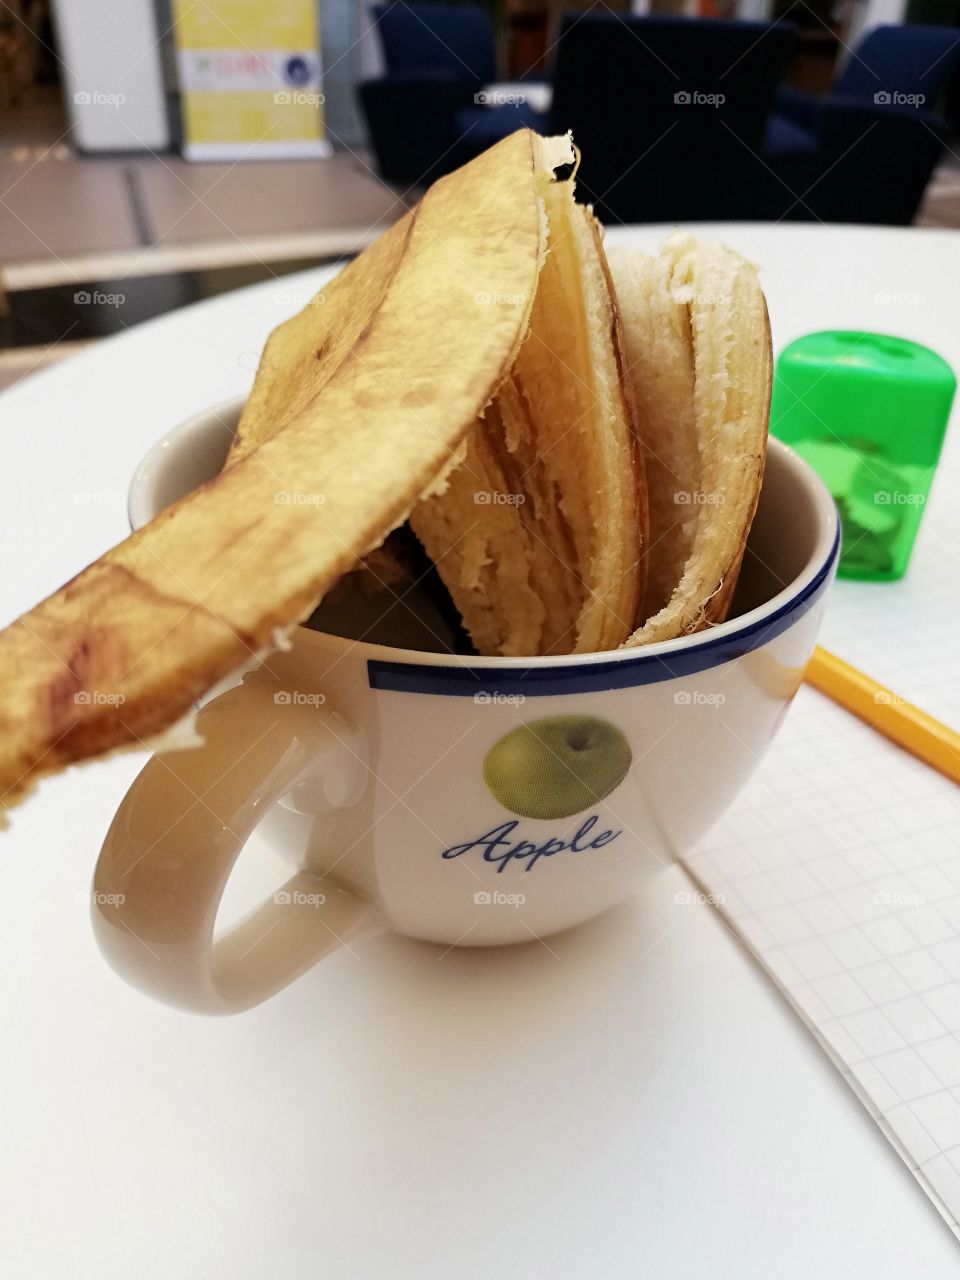 A banana skin in a coffee cup. A drawing of an apple on the surface. A pencil on the sheet of a paper and a green sharpener behind the mug on the table.